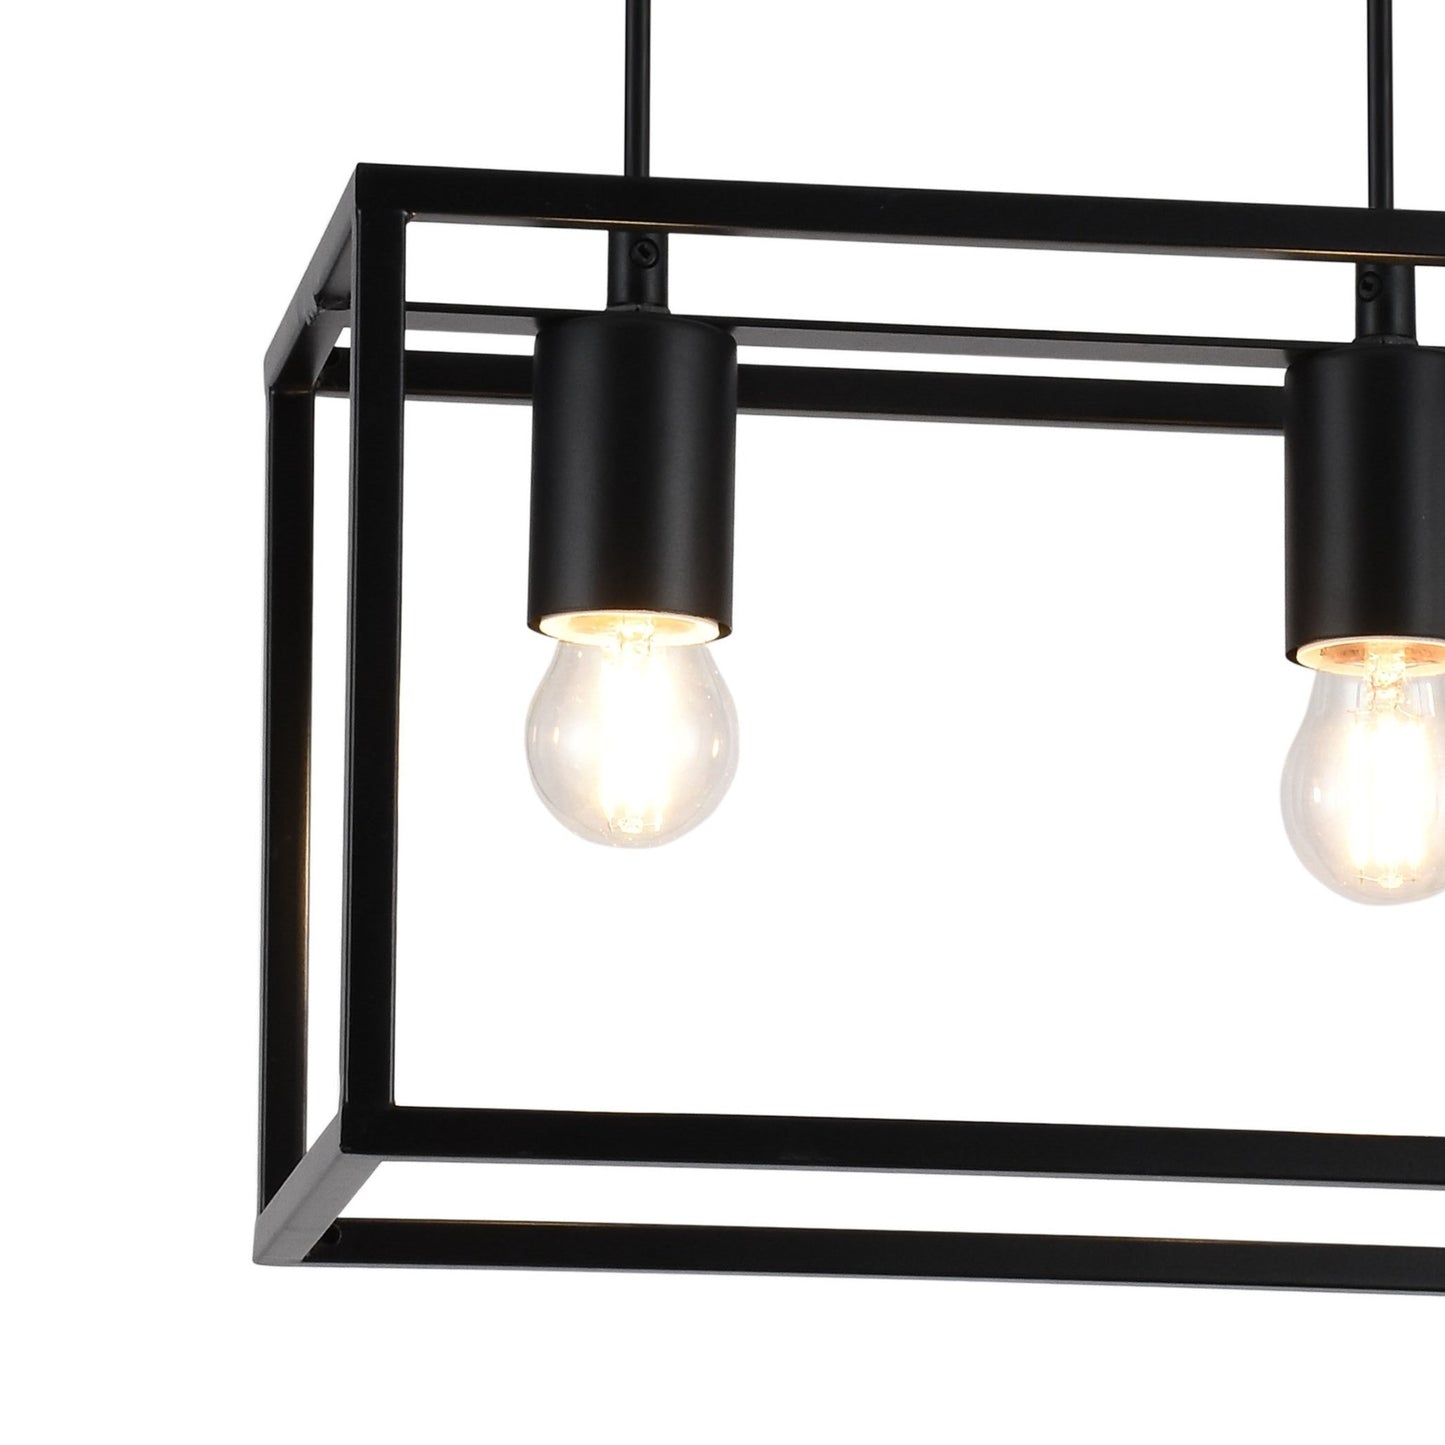  The Molly rectangle ceiling pendant light is a contemporary addition to your home decor. This adjustable black rectangular ceiling pendant light is complimented with 2 light fittings and will add a modern element to any home or commercial property, Would look great positioned over a bar, kitchen island or dining table The adjustable height makes it perfect for any space, helping you customise the lighting to your home or commercial property.